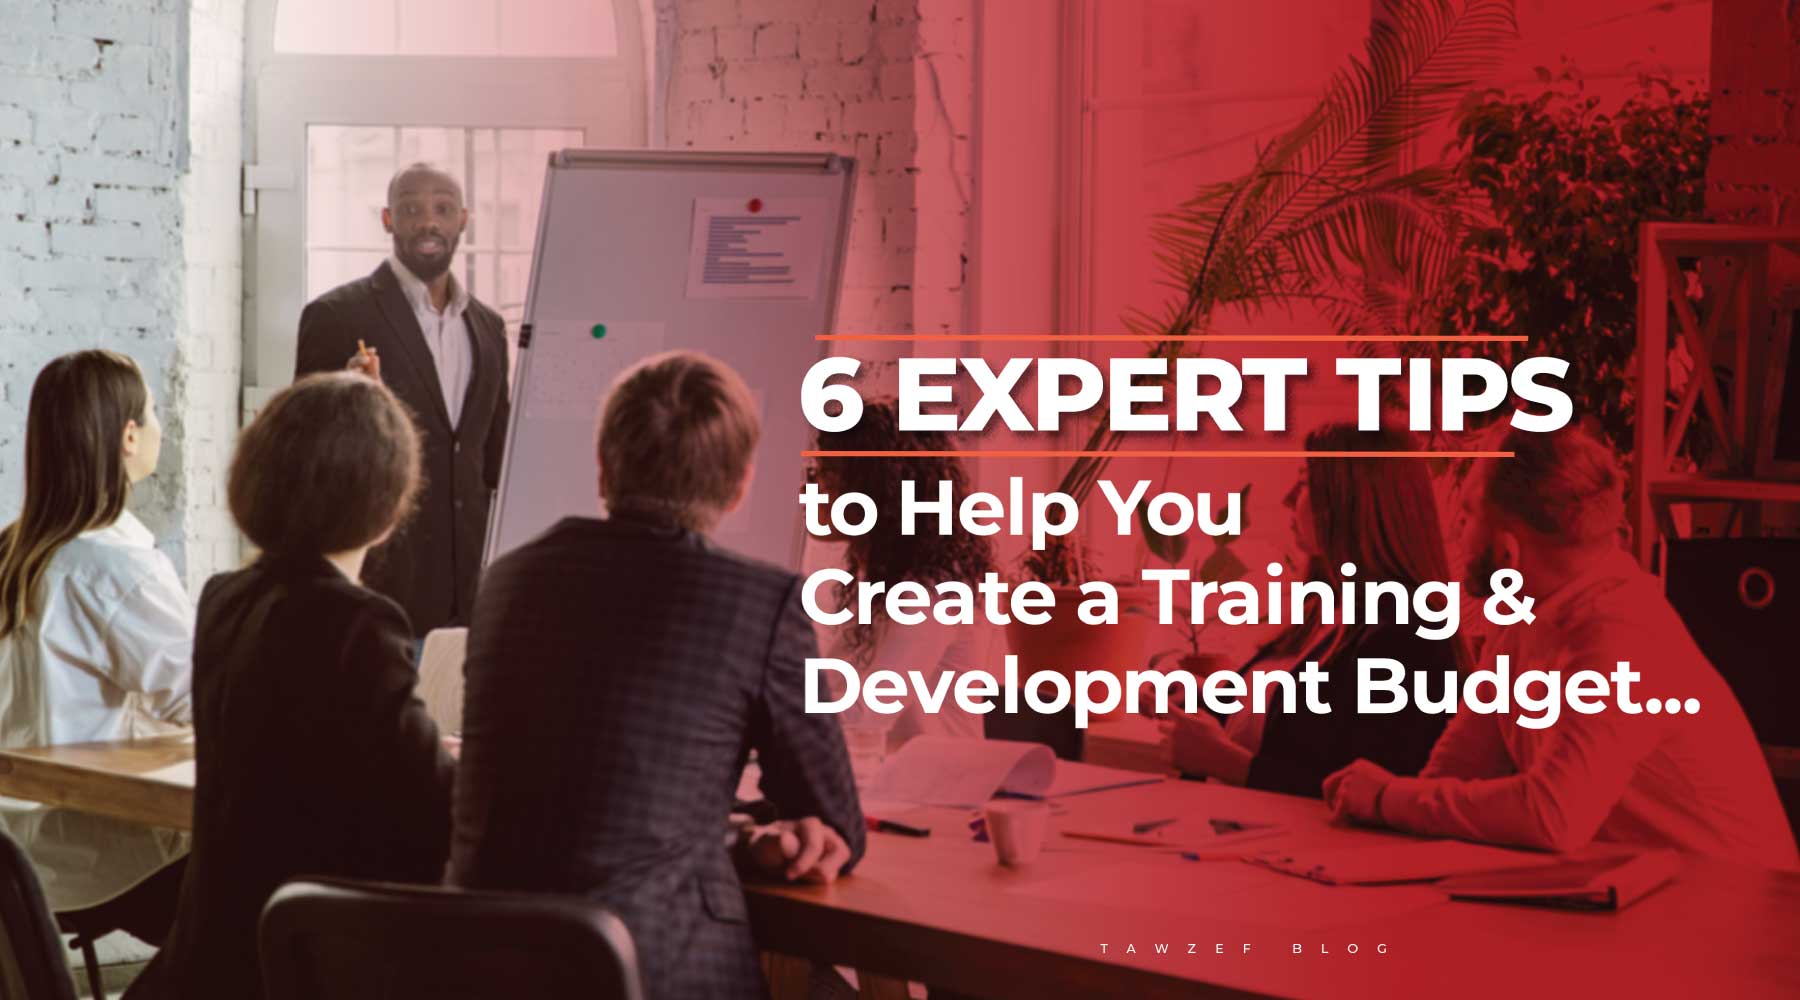 6 expert tips to help you create a training and development budget